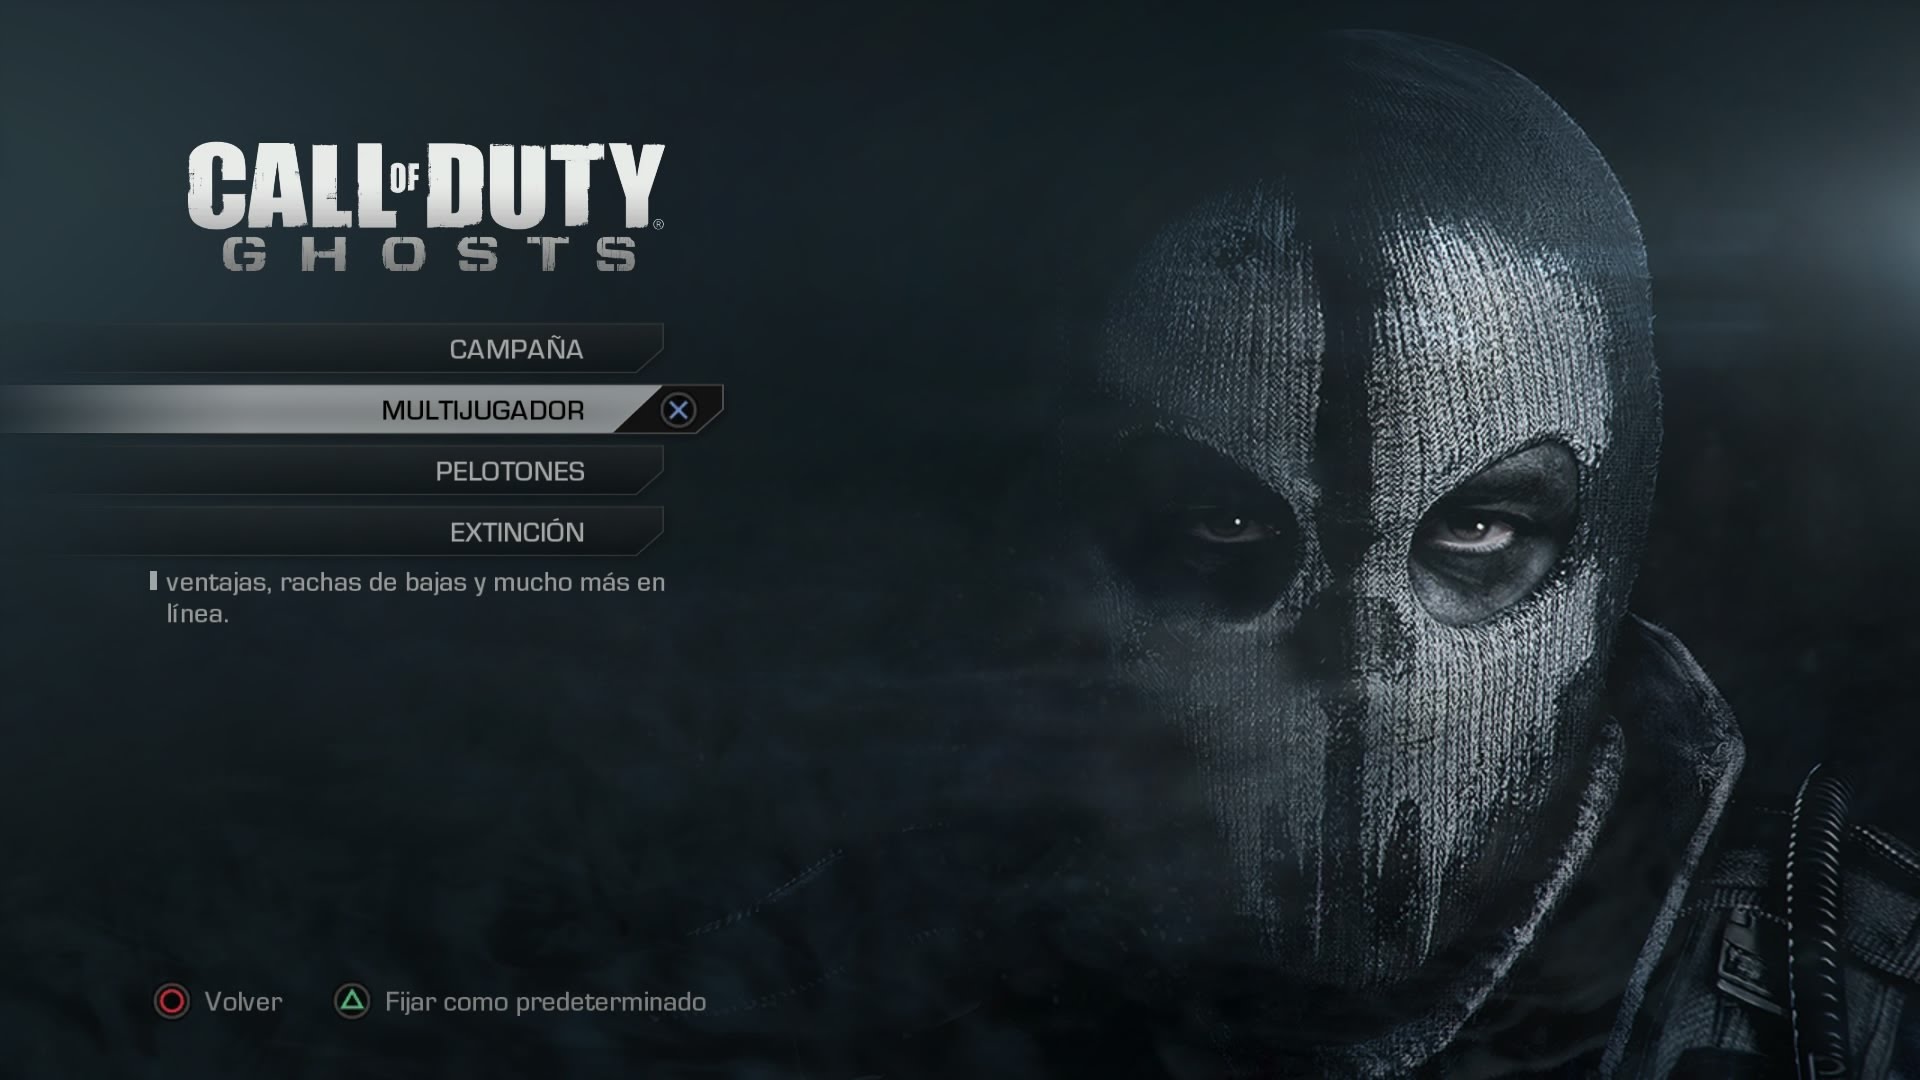 Call of duty Ghosts Capitol 5 / Let's play en Català de Fredolic2013